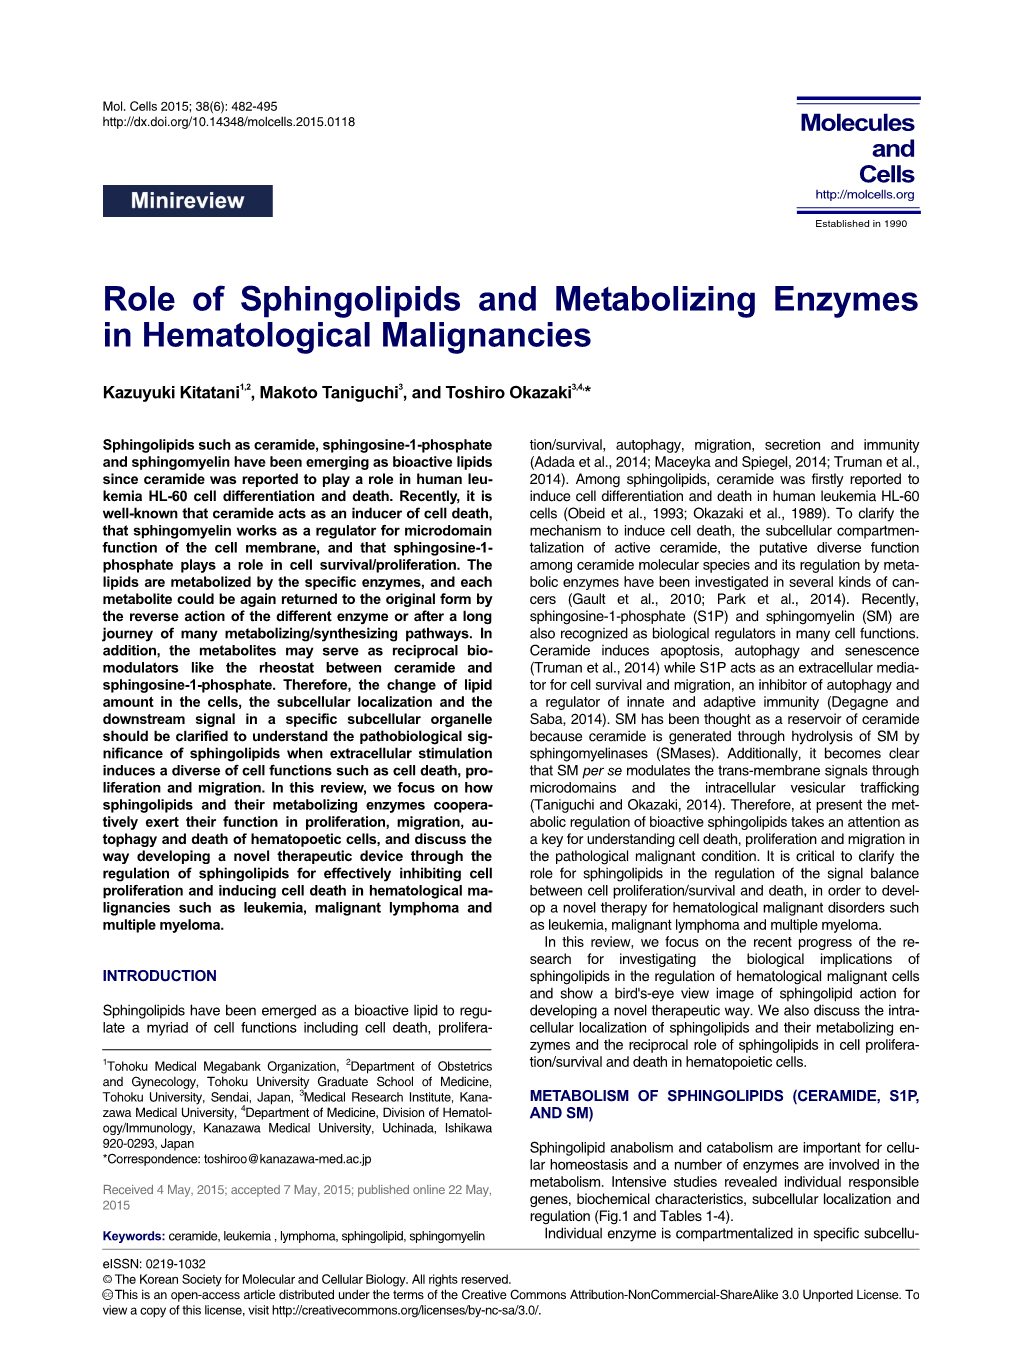 Role of Sphingolipids and Metabolizing Enzymes in Hematological Malignancies